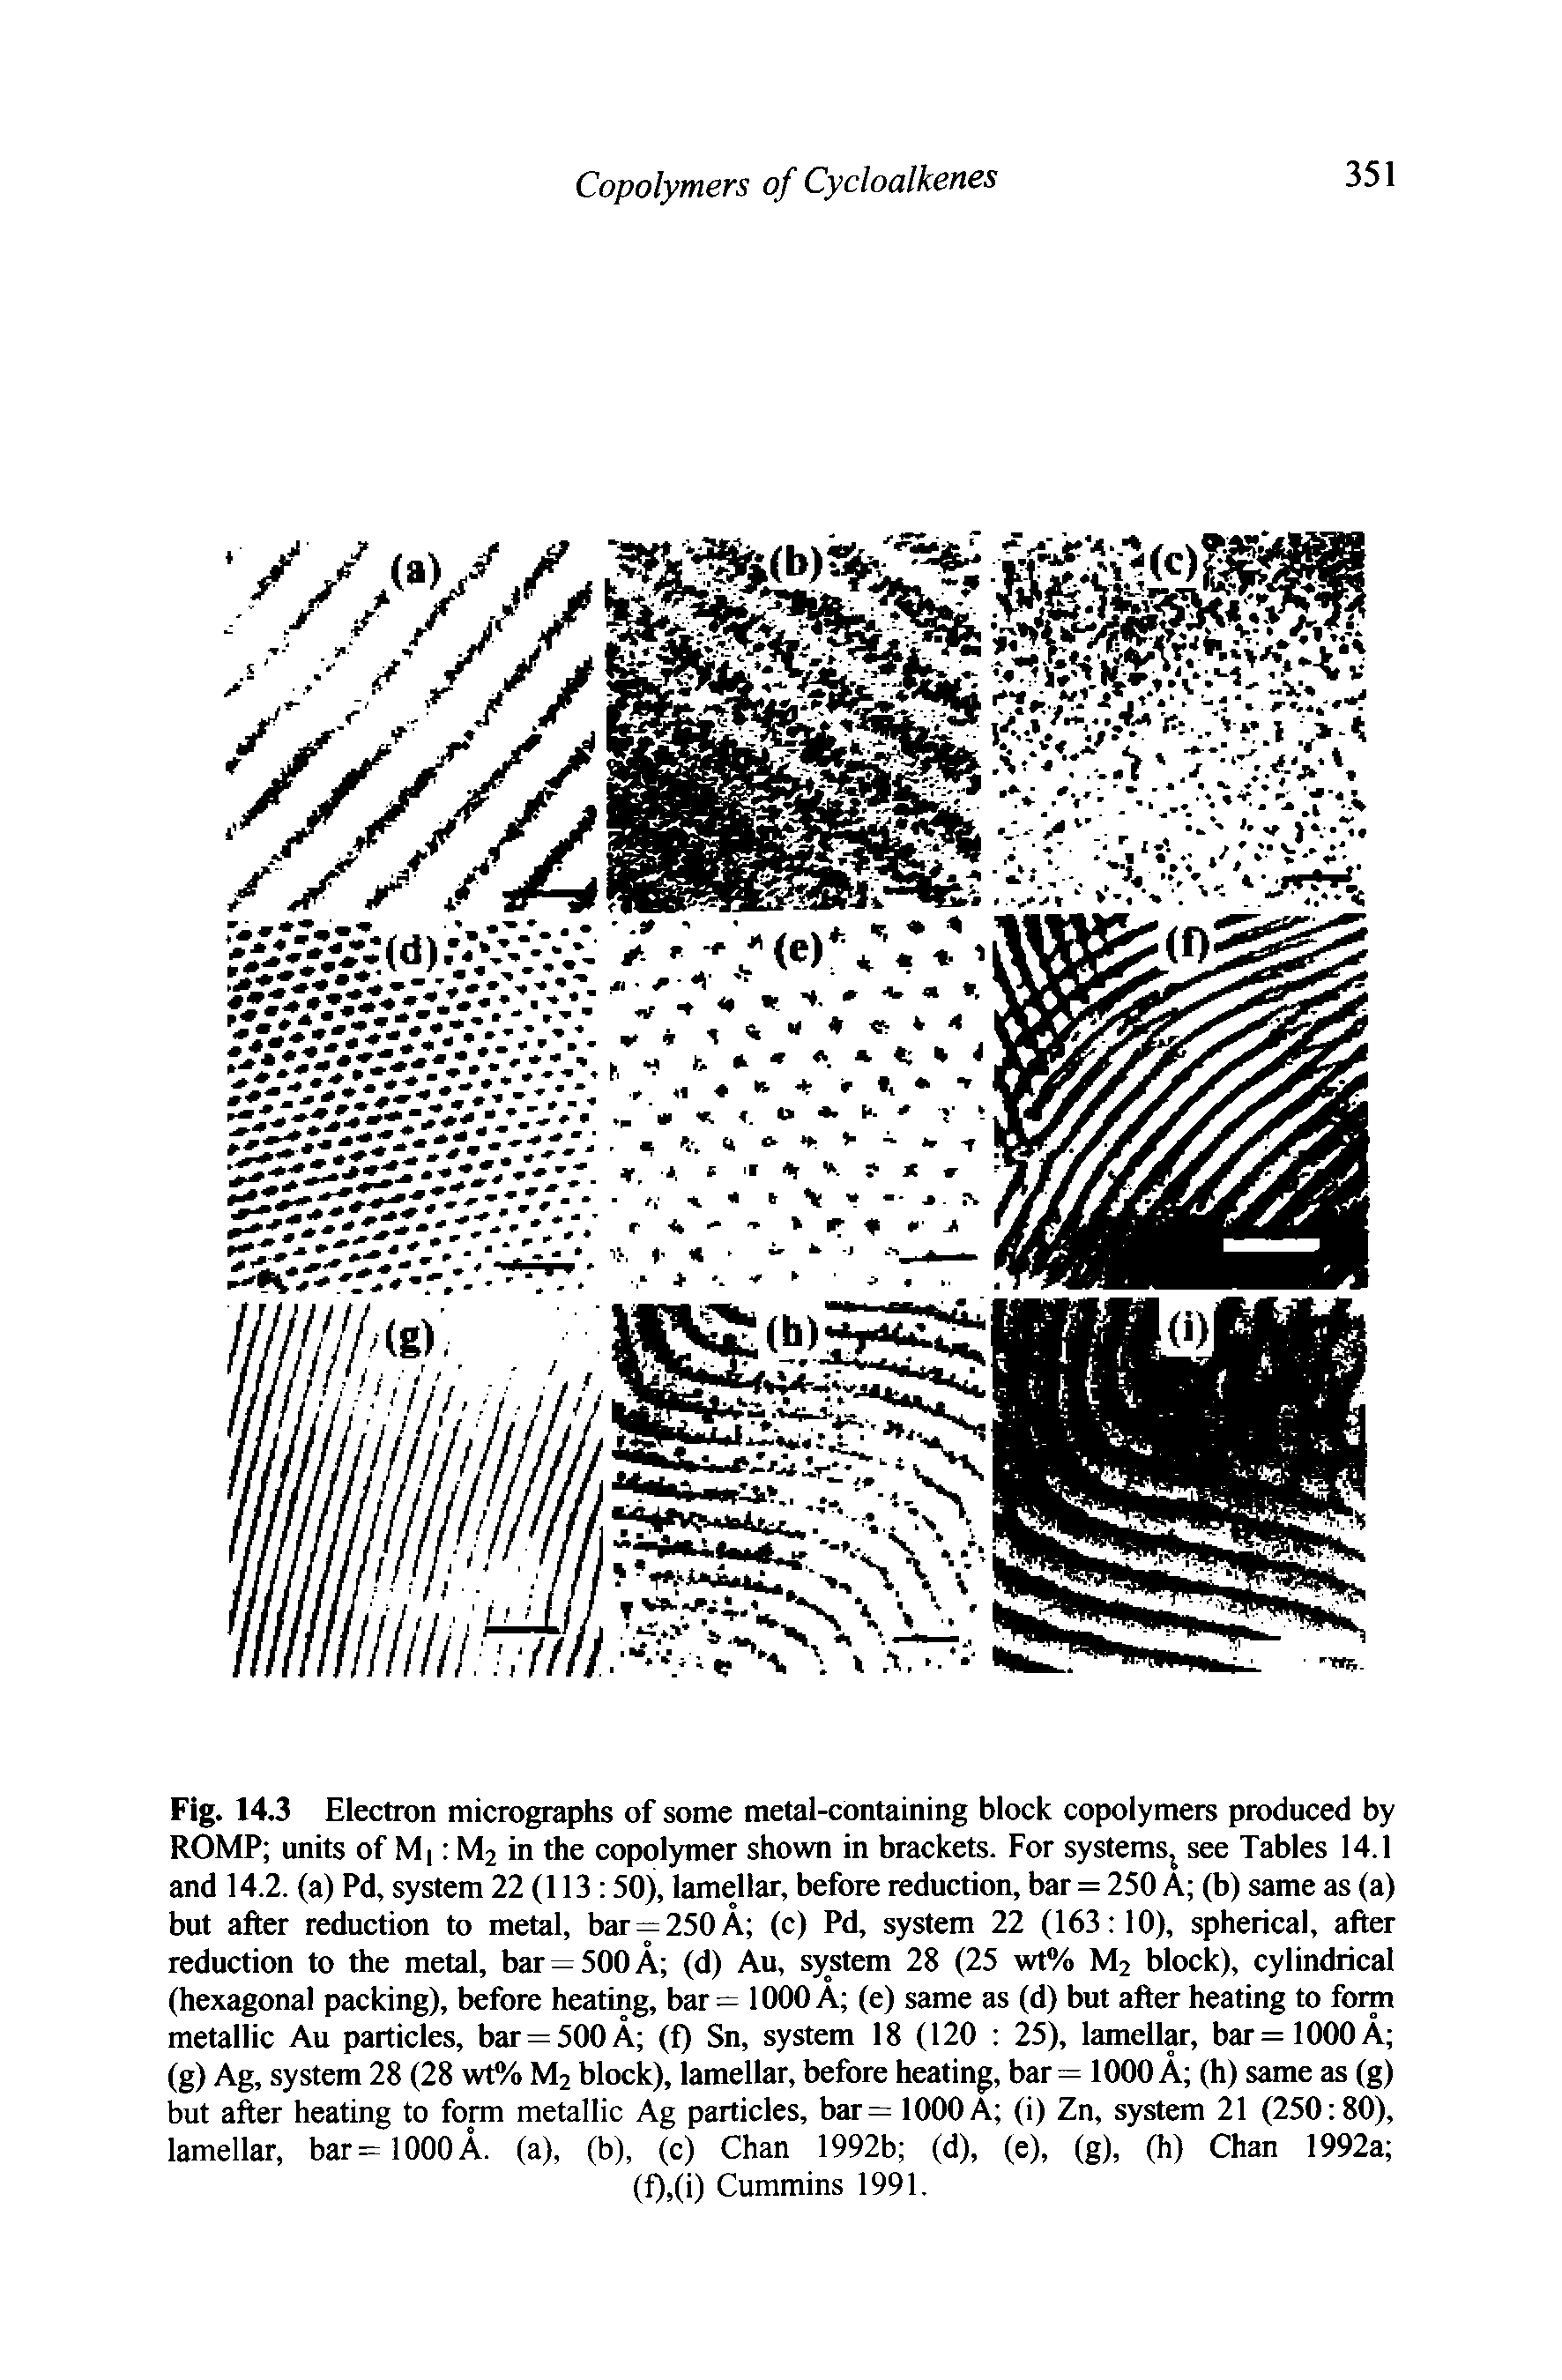 Fig. 14.3 Electron micrographs of some metal-containing block copolymers produced by ROMP units of M M2 in the copolymer shown in brackets. For systems see Tables 14.1 and 14.2. (a) Pd, system 22 (113 50), lamellar, before reduction, bar = 250 A (b) same as (a) but after reduction to metal, bar ==250 A (c) Pd, system 22 (163 10), spherical, after reduction to the metal, bar = 500 A (d) Au, system 28 (25 wt% M2 block), cylindrical (hexagonal packing), before heating, bar= 1000 A (e) same as (d) but after heating to form metallic Au particles, bar = 500 A (f) Sn, system 18 (120 25), lamellar, bar =1000 A (g) Ag, system 28 (28 wt% M2 block), lamellar, before heating, bar= 1000 A (h) same as (g) but after heating to form metallic Ag particles, bar= 1000A (i) Zn, system 21 (250 80), lamellar, bar = 1000 A. (a), (b), (c) Chan 1992b (d), (e), (g), (h) Chan 1992a ...